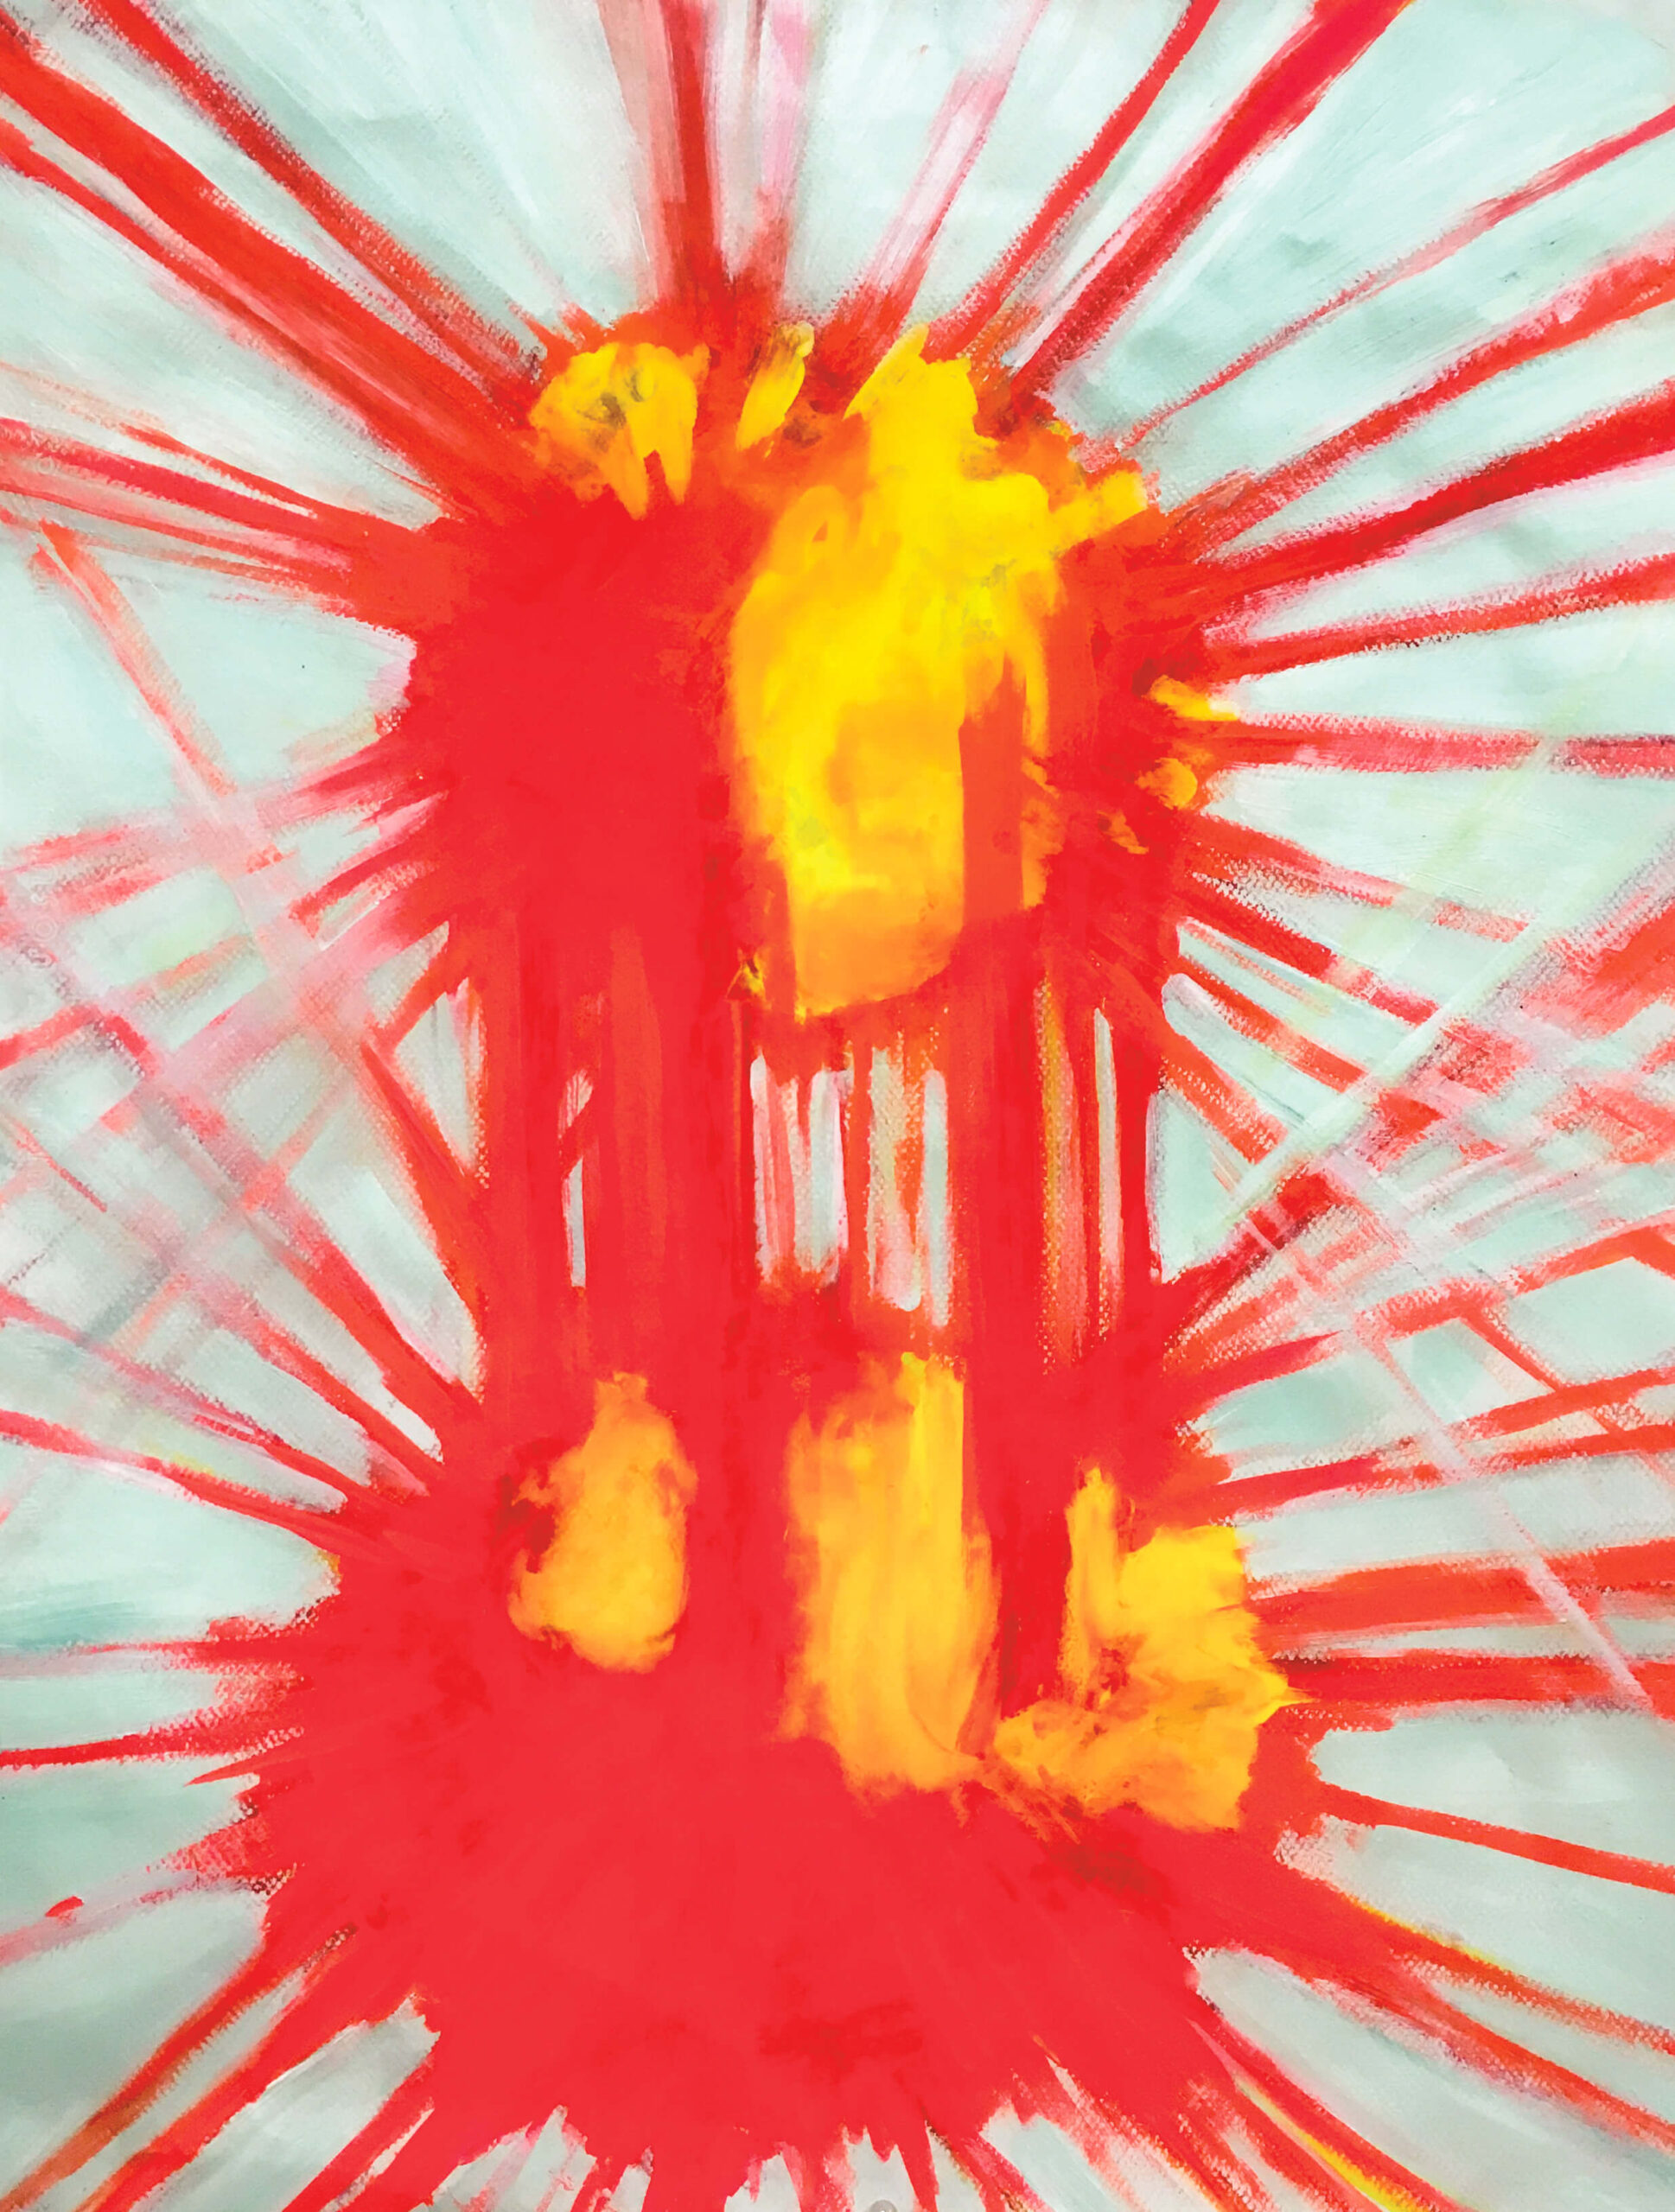 An abstract painting of two explosions on a light blue background. The explosions are colored in yellow and orange hues.